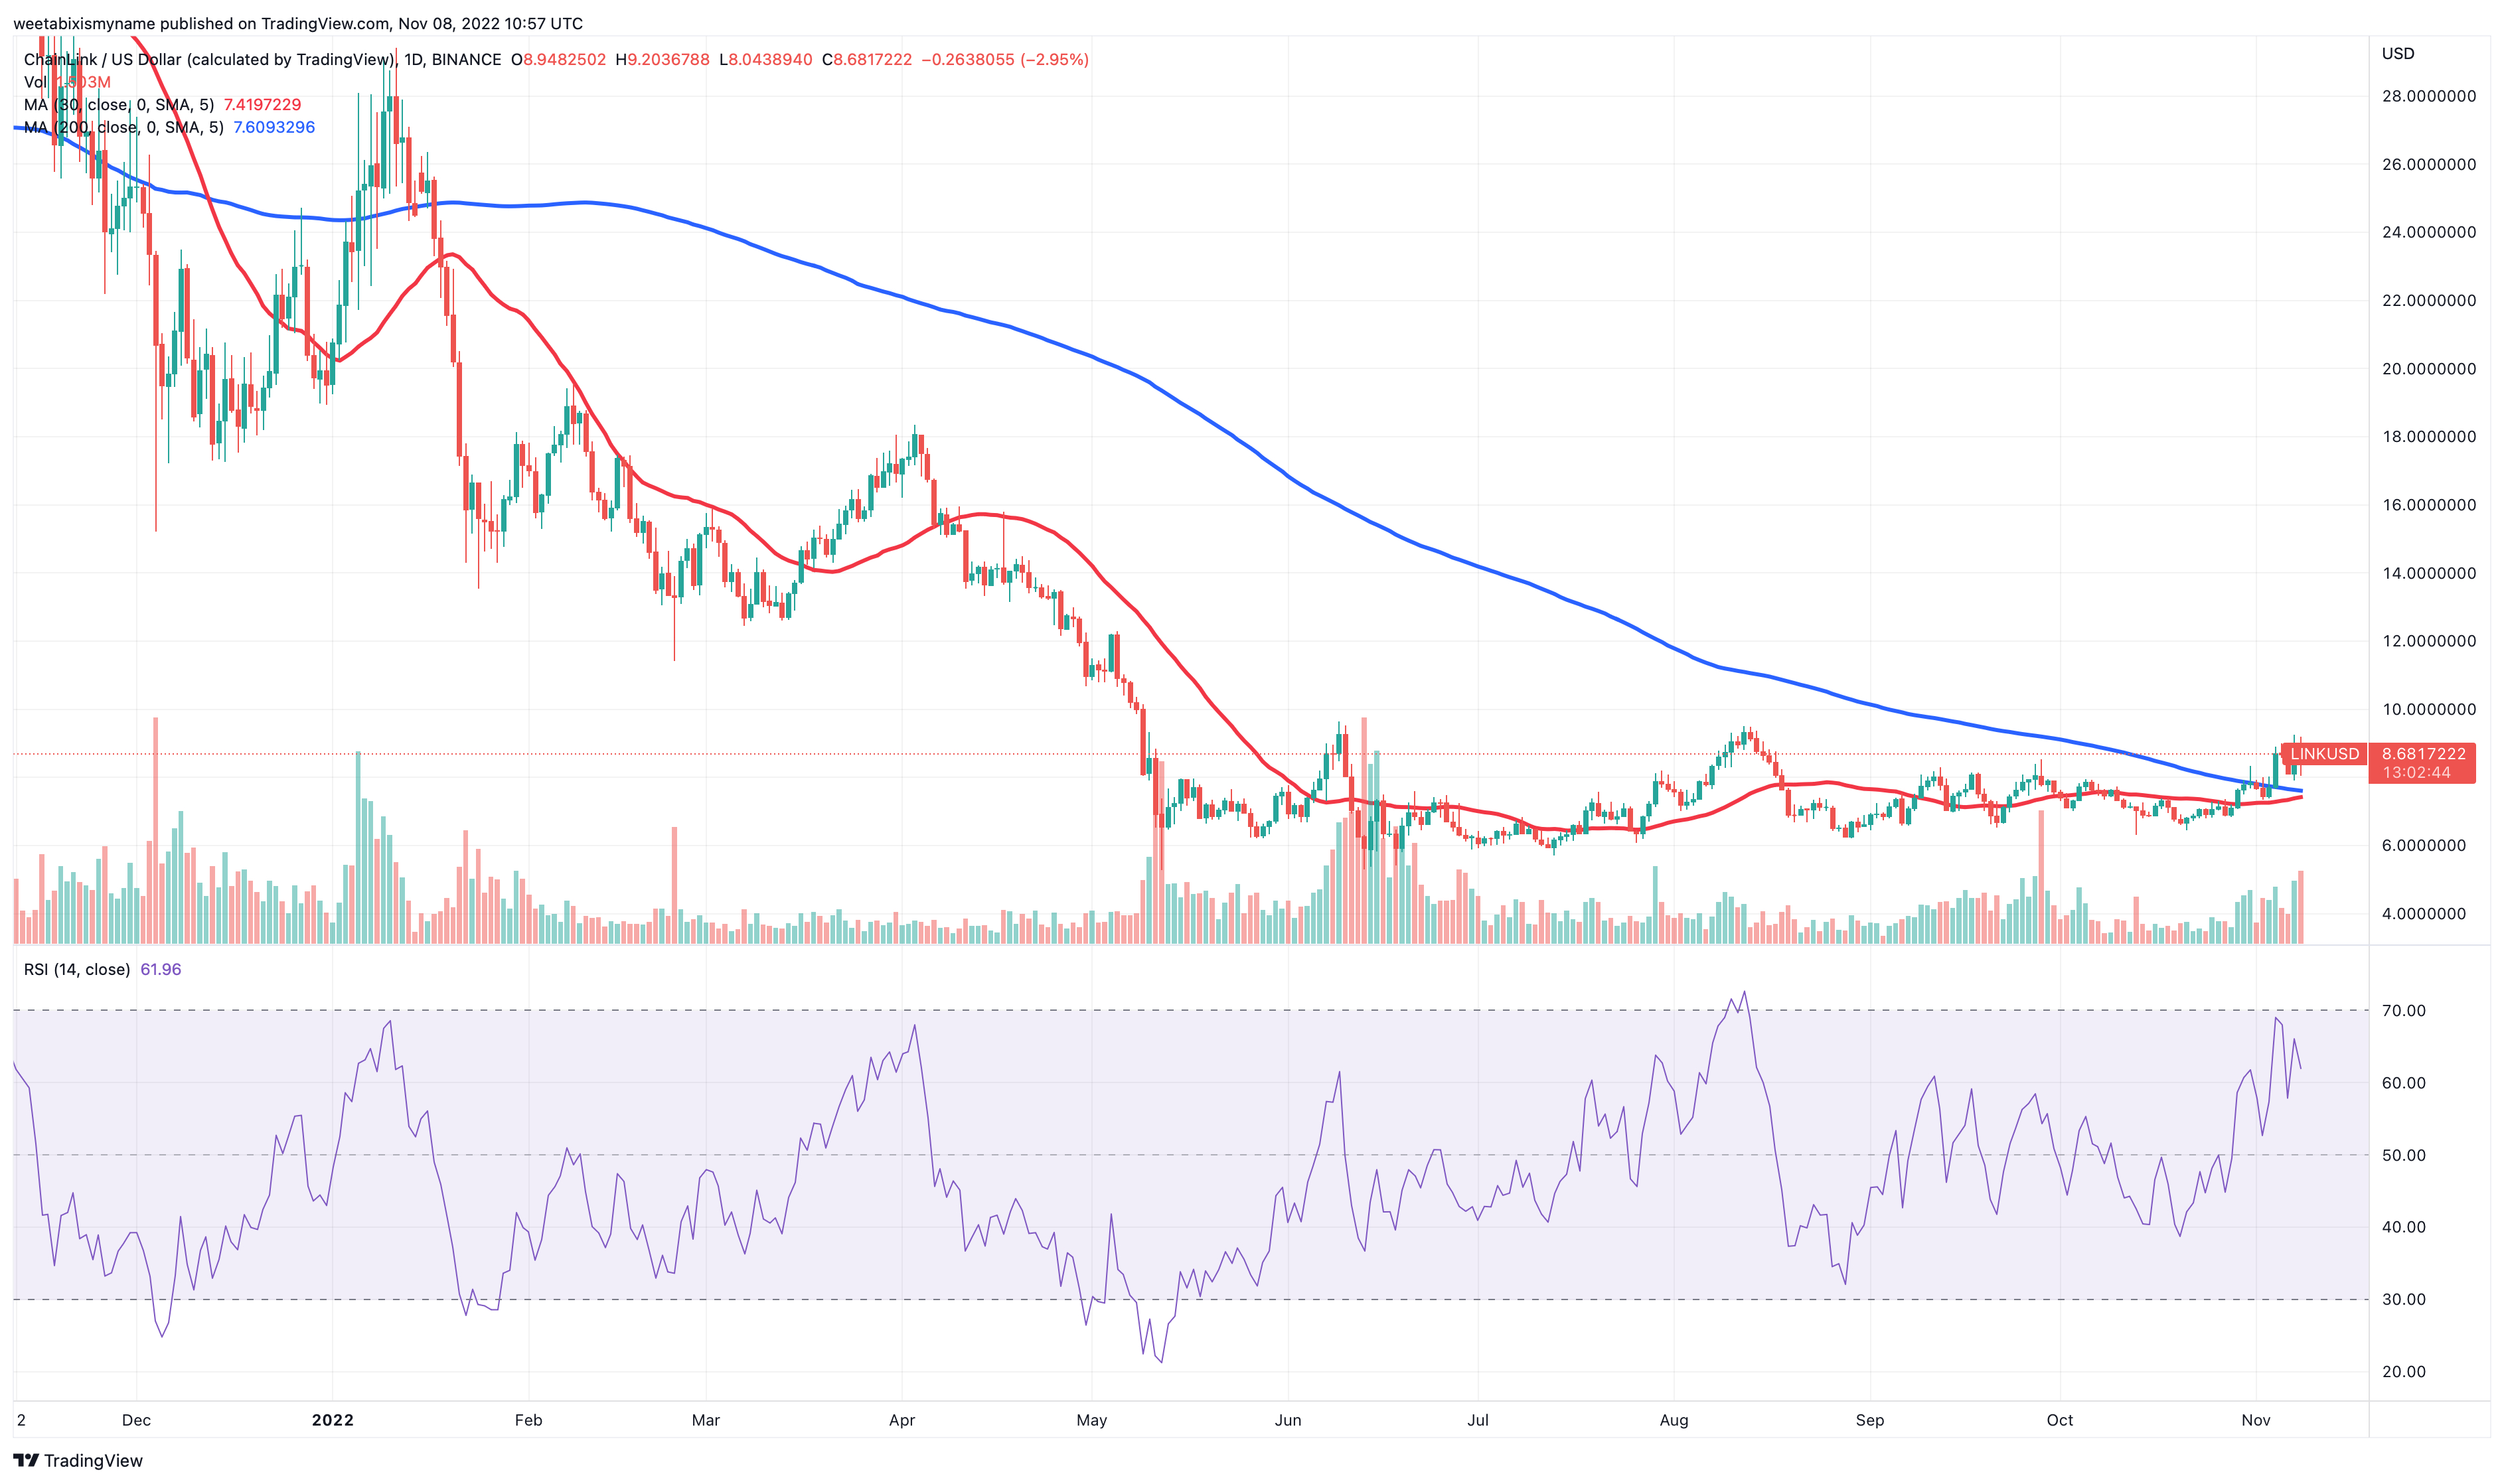 LINK price chart - Source: Tradingview